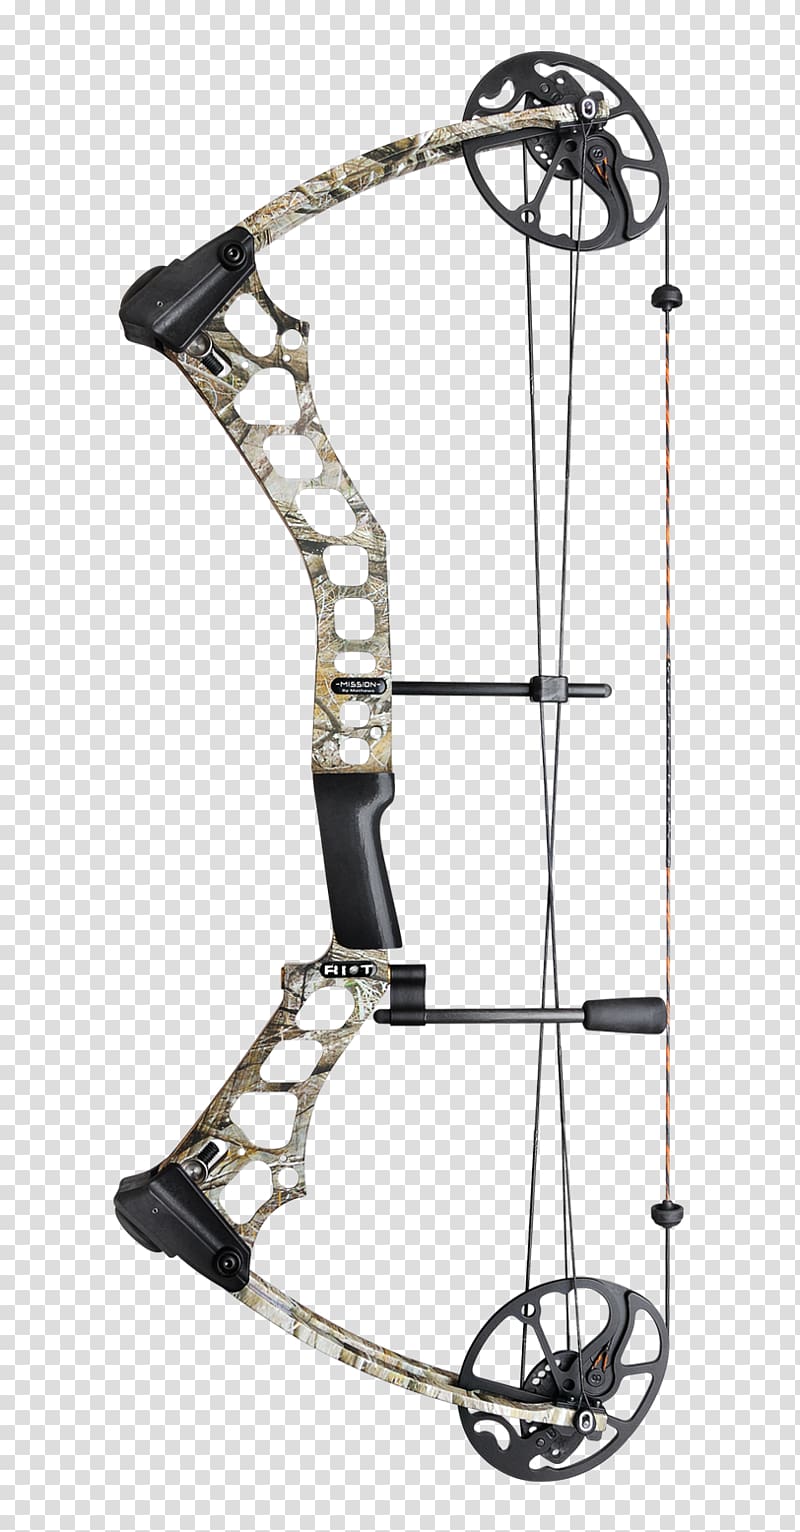 Compound Bows Bow and arrow Archery Bowhunting, archery transparent background PNG clipart